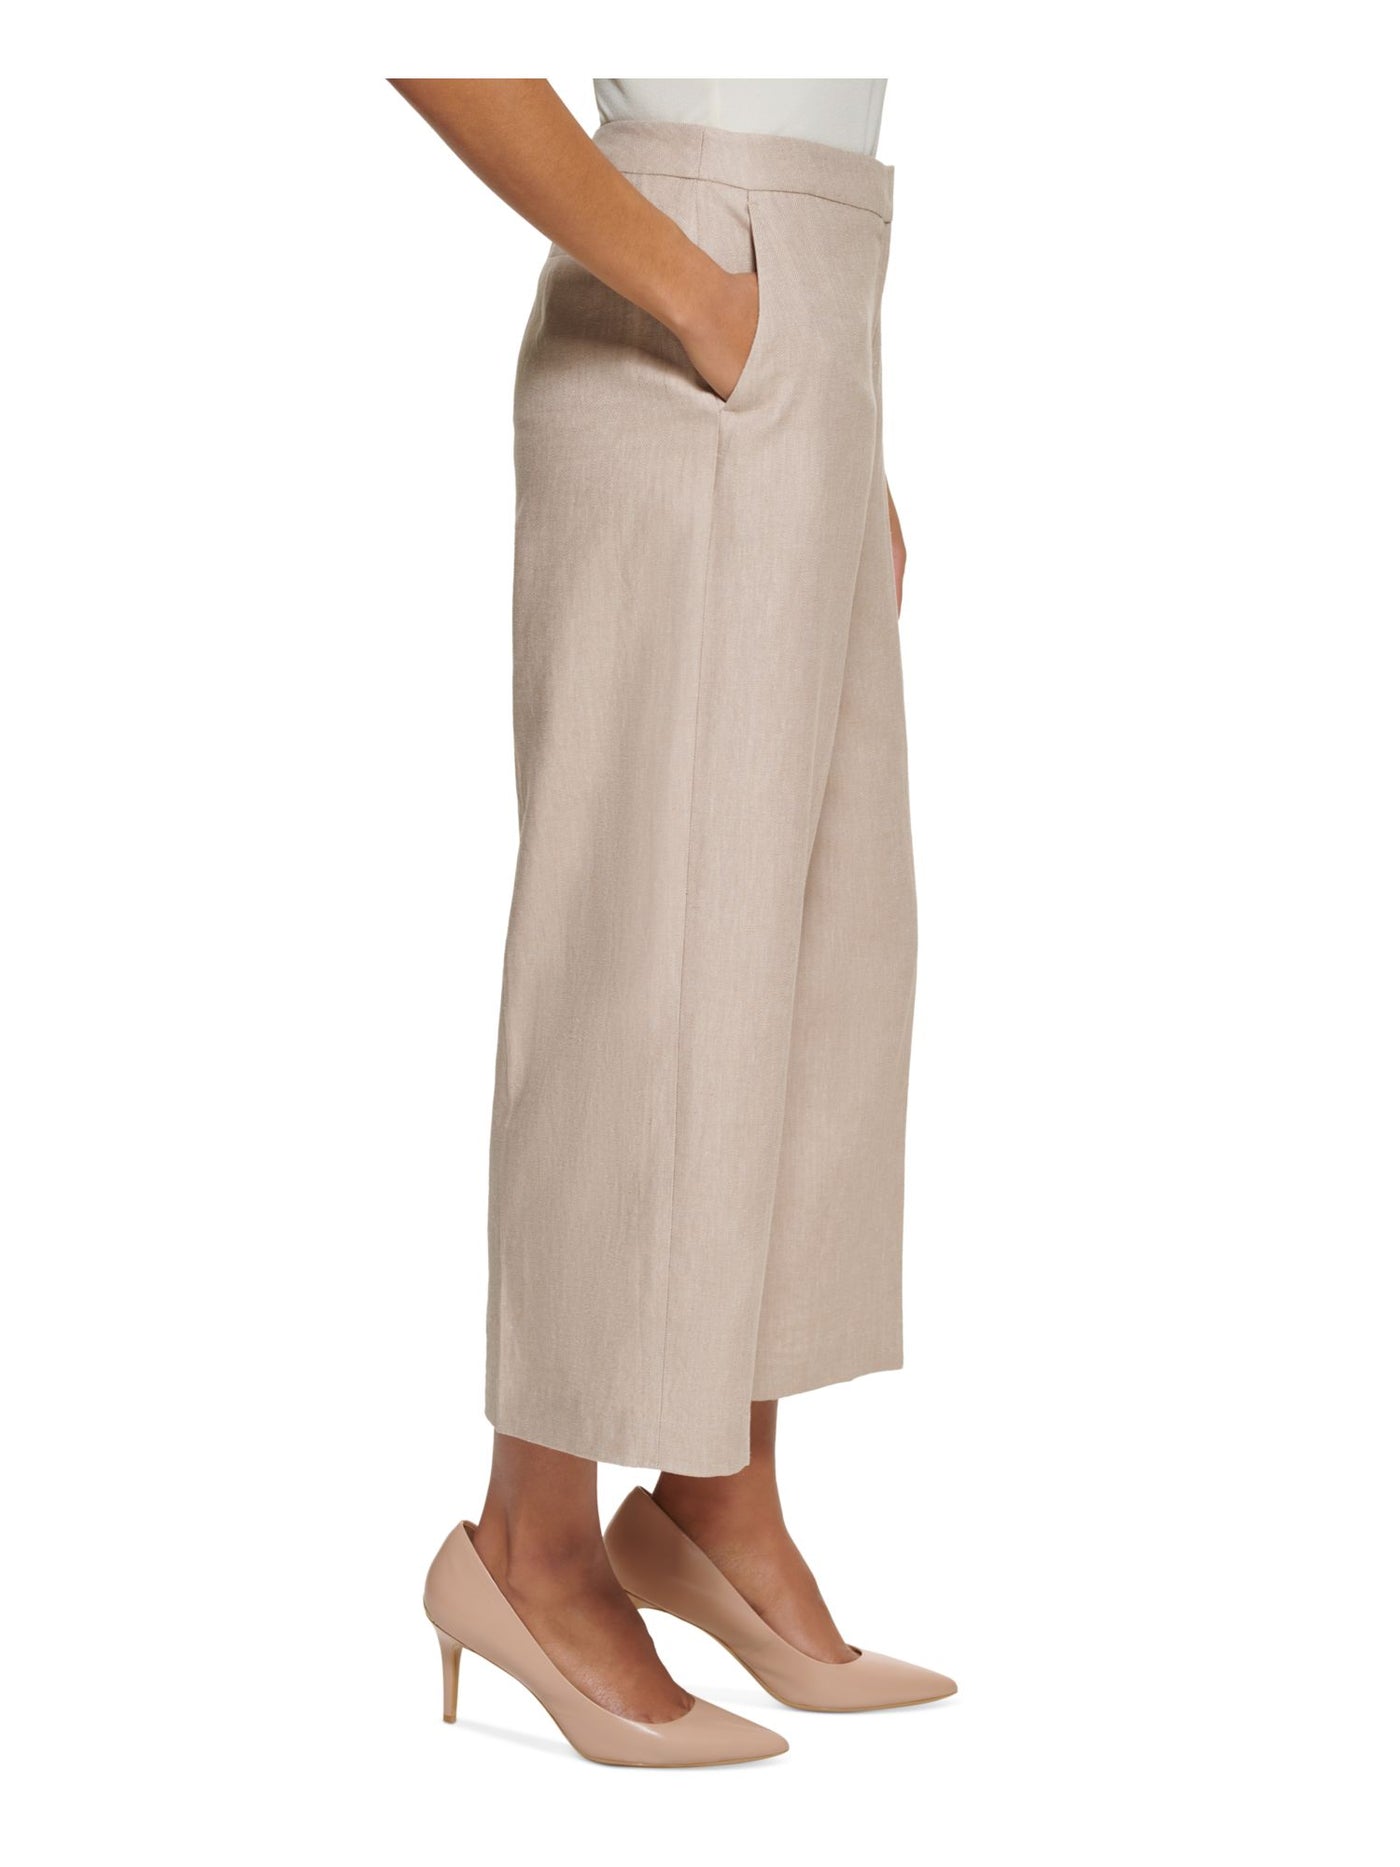 CALVIN KLEIN Womens Beige Zippered Pocketed Cropped Heather Wear To Work Wide Leg Pants Petites 2P